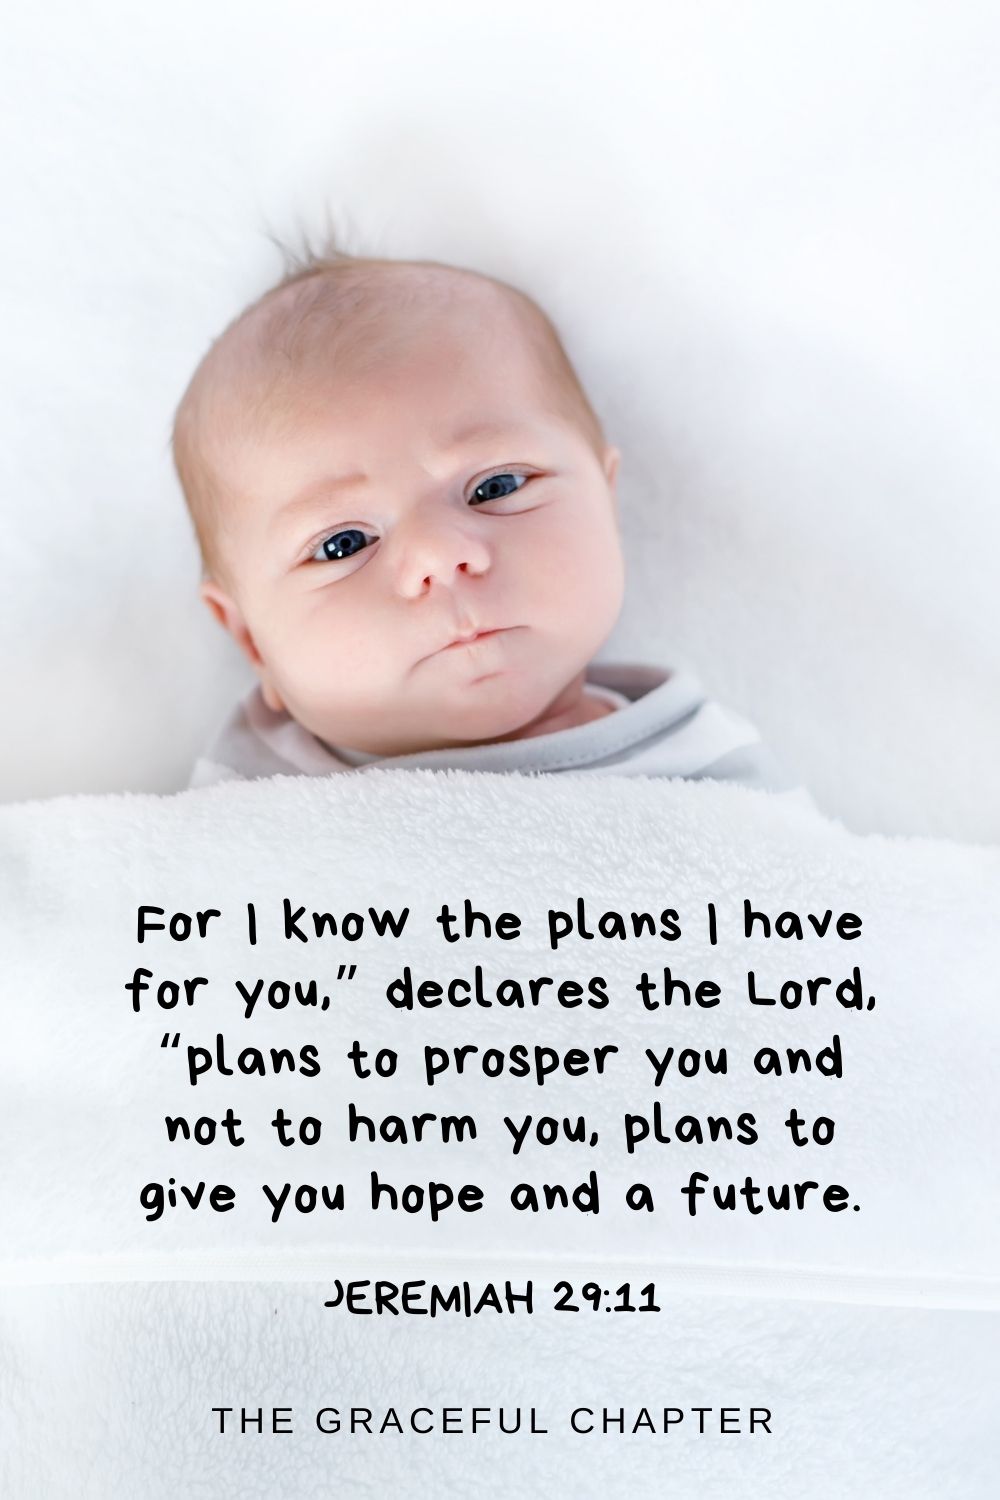 For I know the plans I have for you,” declares the Lord, “plans to prosper you and not to harm you, plans to give you hope and a future. Jeremiah 29:11